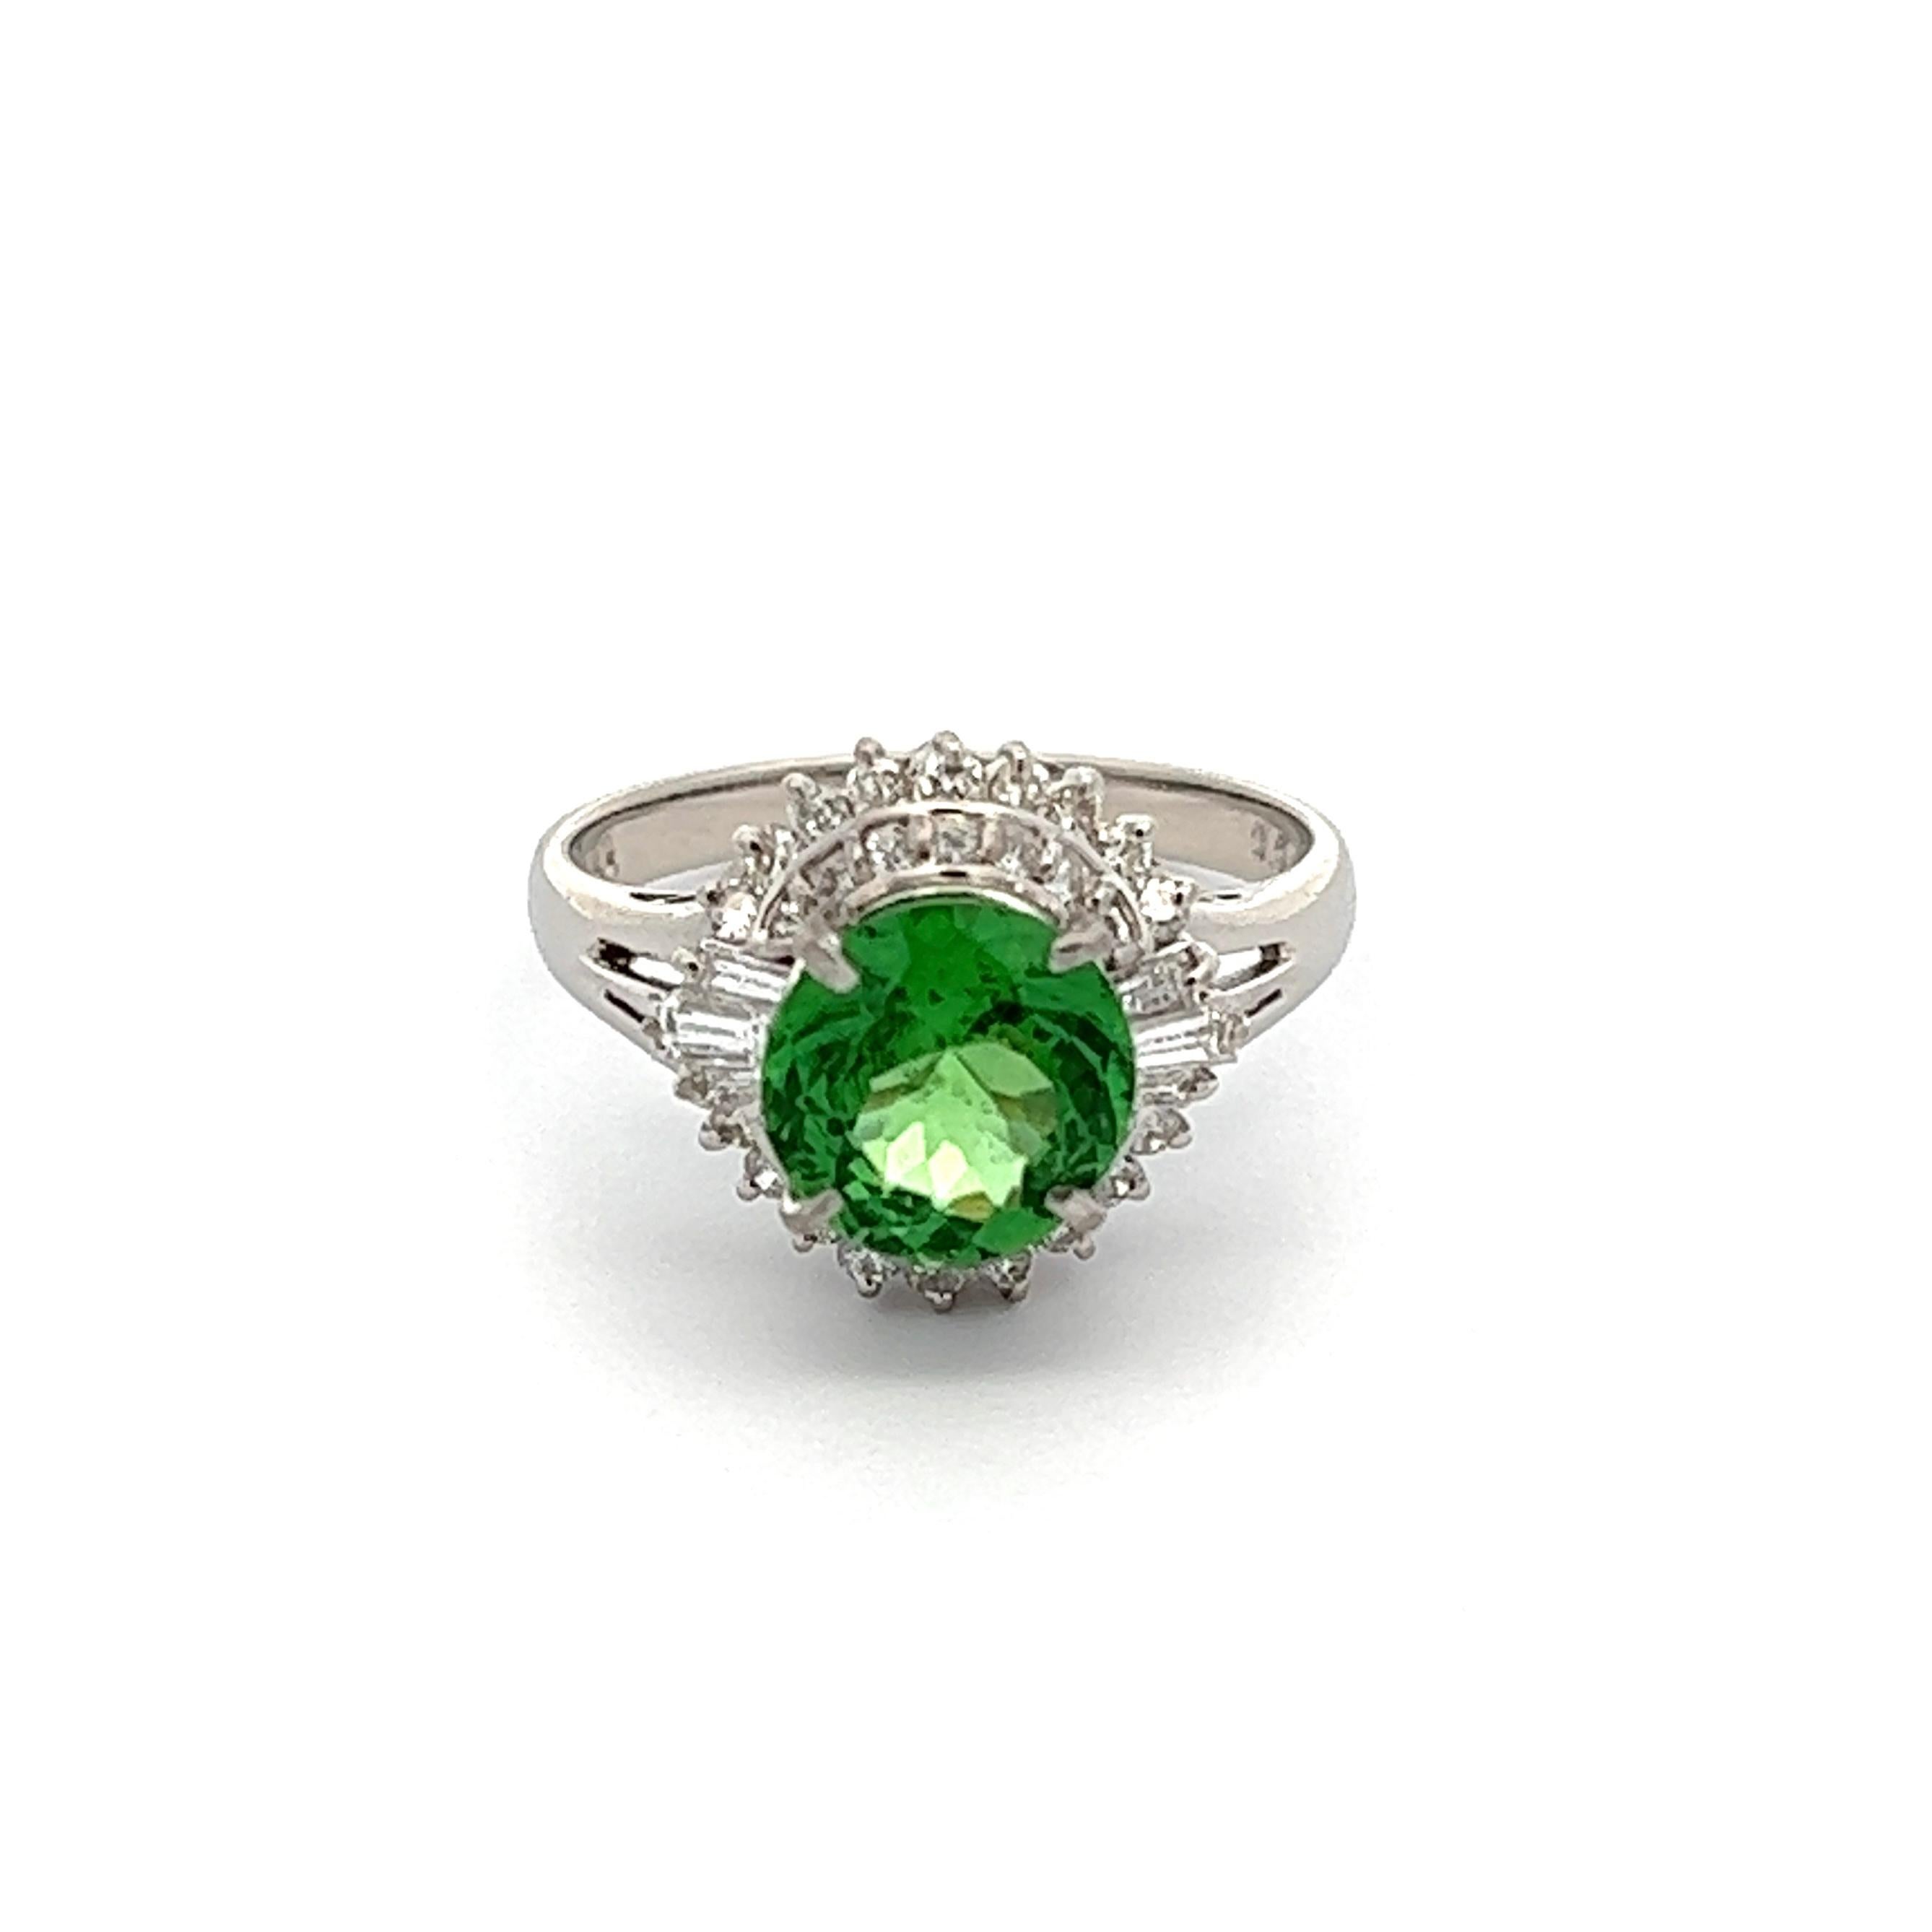 Simply Beautiful! Finely detailed Tsavorite Garnet and Diamond Cocktail Ring. Centering a securely nestled Hand set 1.84 Carat Tsavorite Garnet surrounded by Diamonds, weighing approx. 0.5tcw. Hand crafted Platinum mounting. Approx. dimensions: